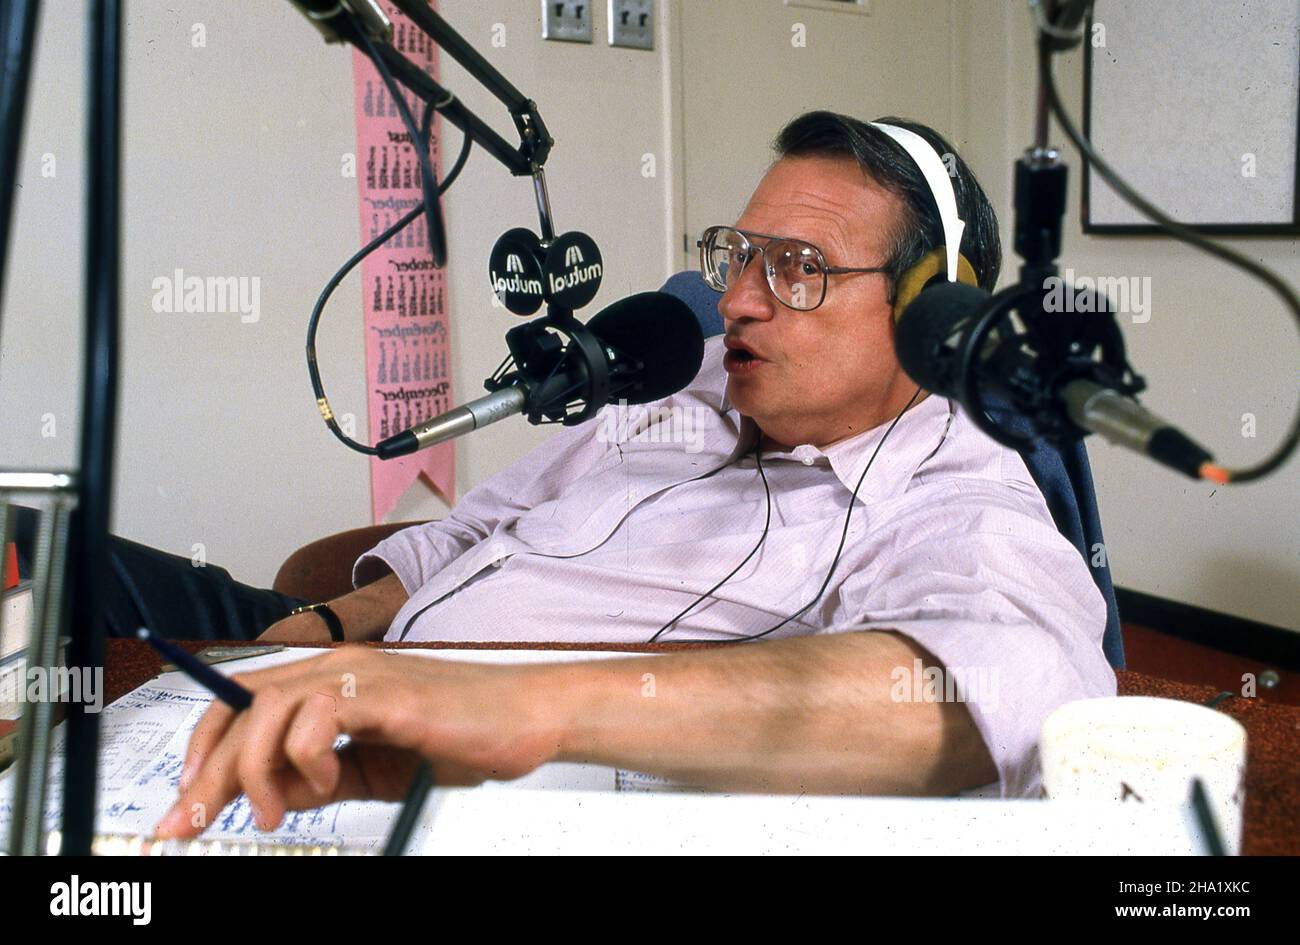 Long before CNN Larry King had a popular radio program that started late and went for the better part of the night.. TIME magazine..  I remember that I had worked all day  during that day. I  photographed the first part of the radio show staying out of the way and staying quiet.  King had no guests and it was just him sitting talking into his microphones. I was determined to stay until the end of the program just in case a picture would occur.  So far nothing and I kinda went to sleep.  King looked over, brought a microphone over, woke me, and began to interview the TIME magazine photographer. Stock Photo